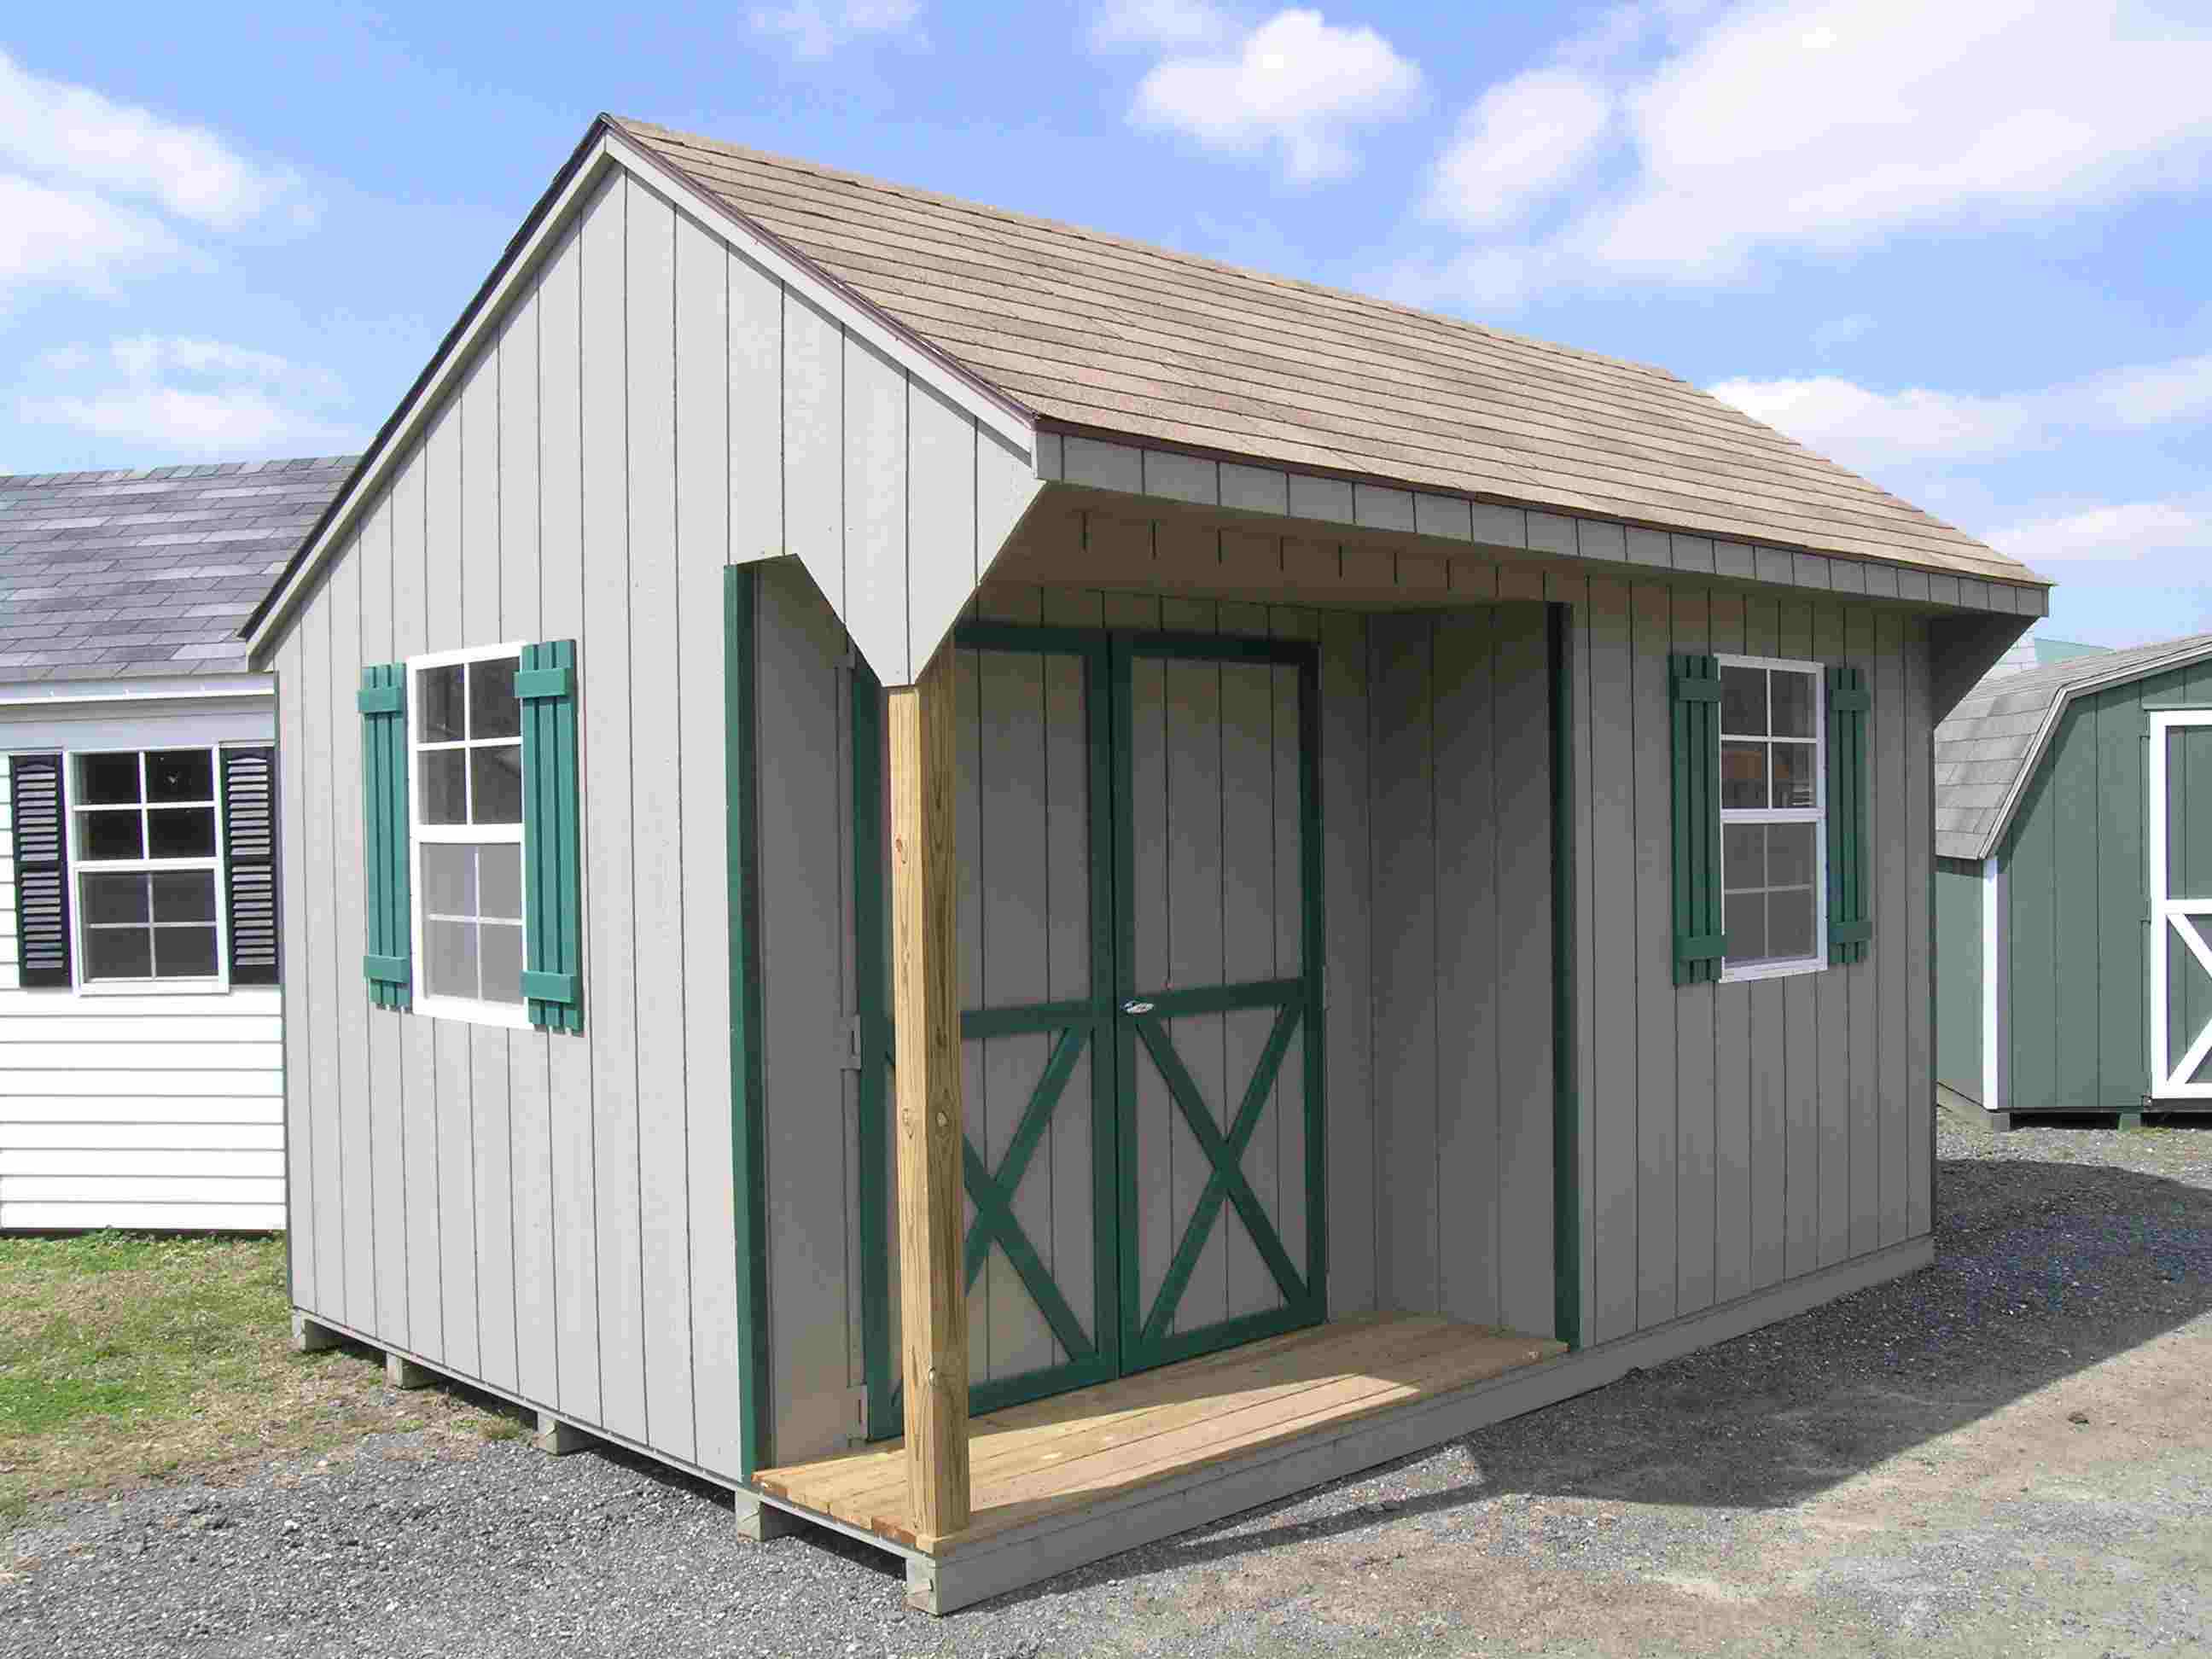 Quaker Shed with a porch.